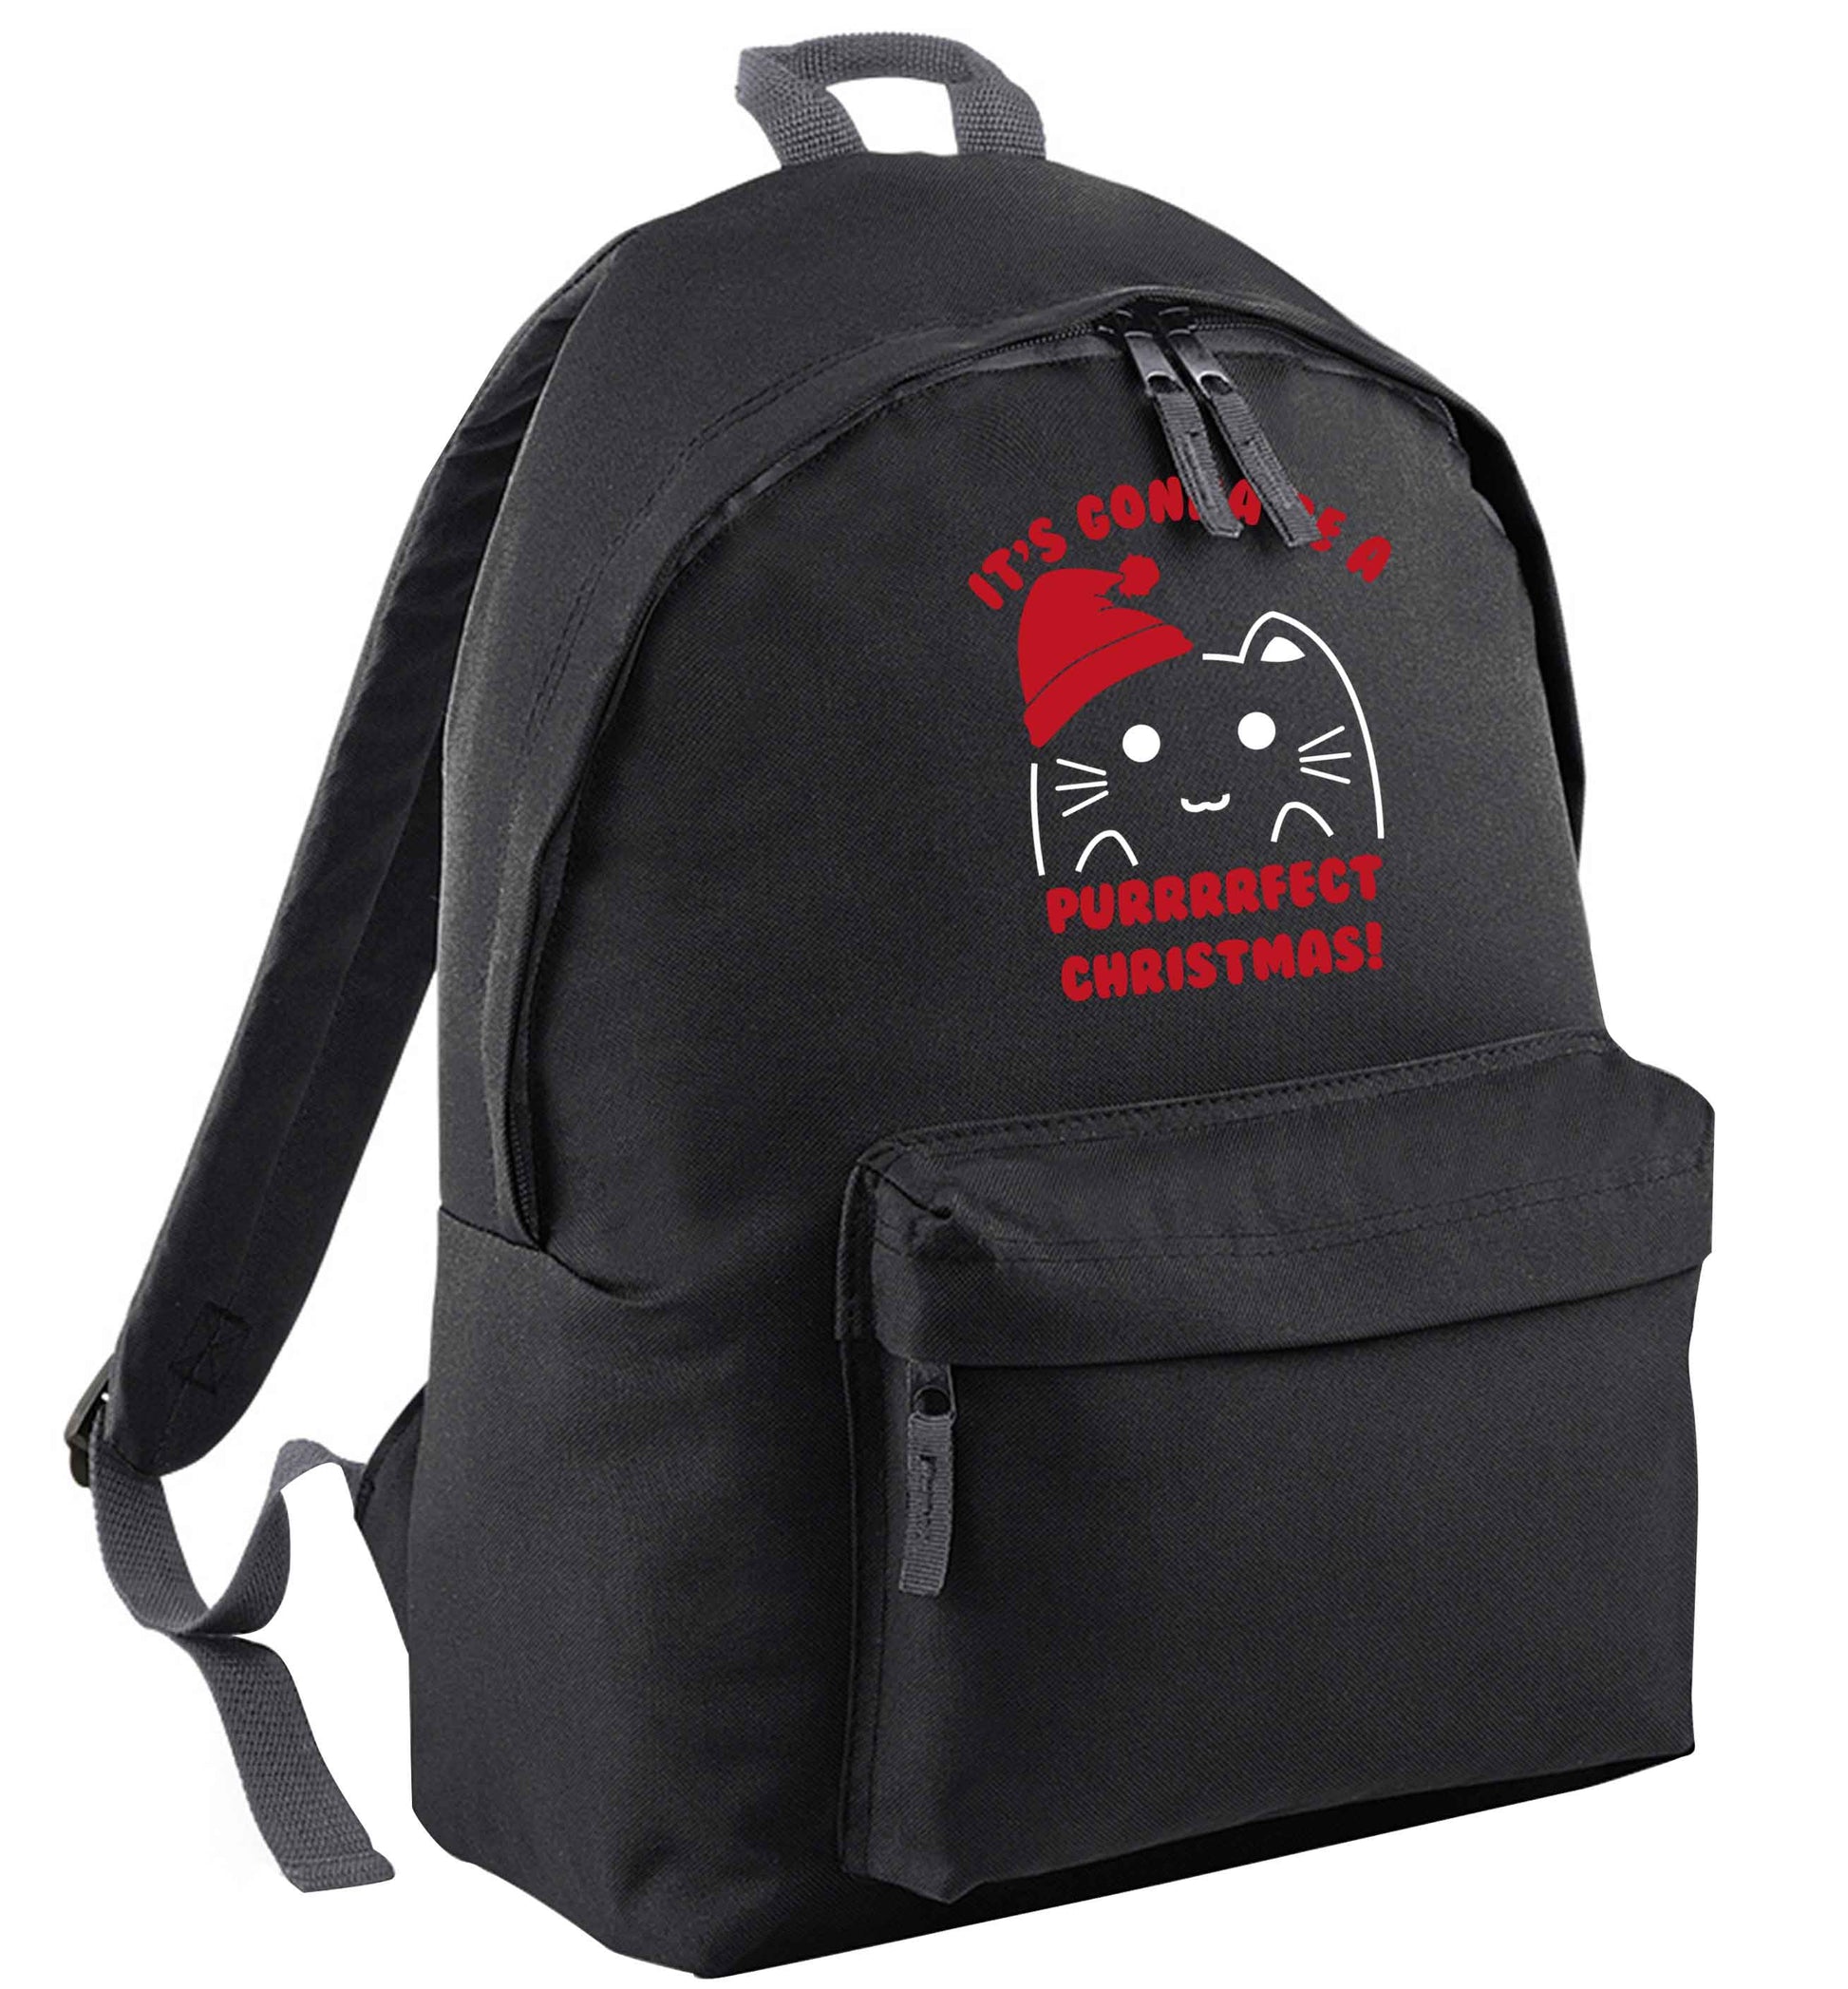 It's going to be a purrfect Christmas black adults backpack